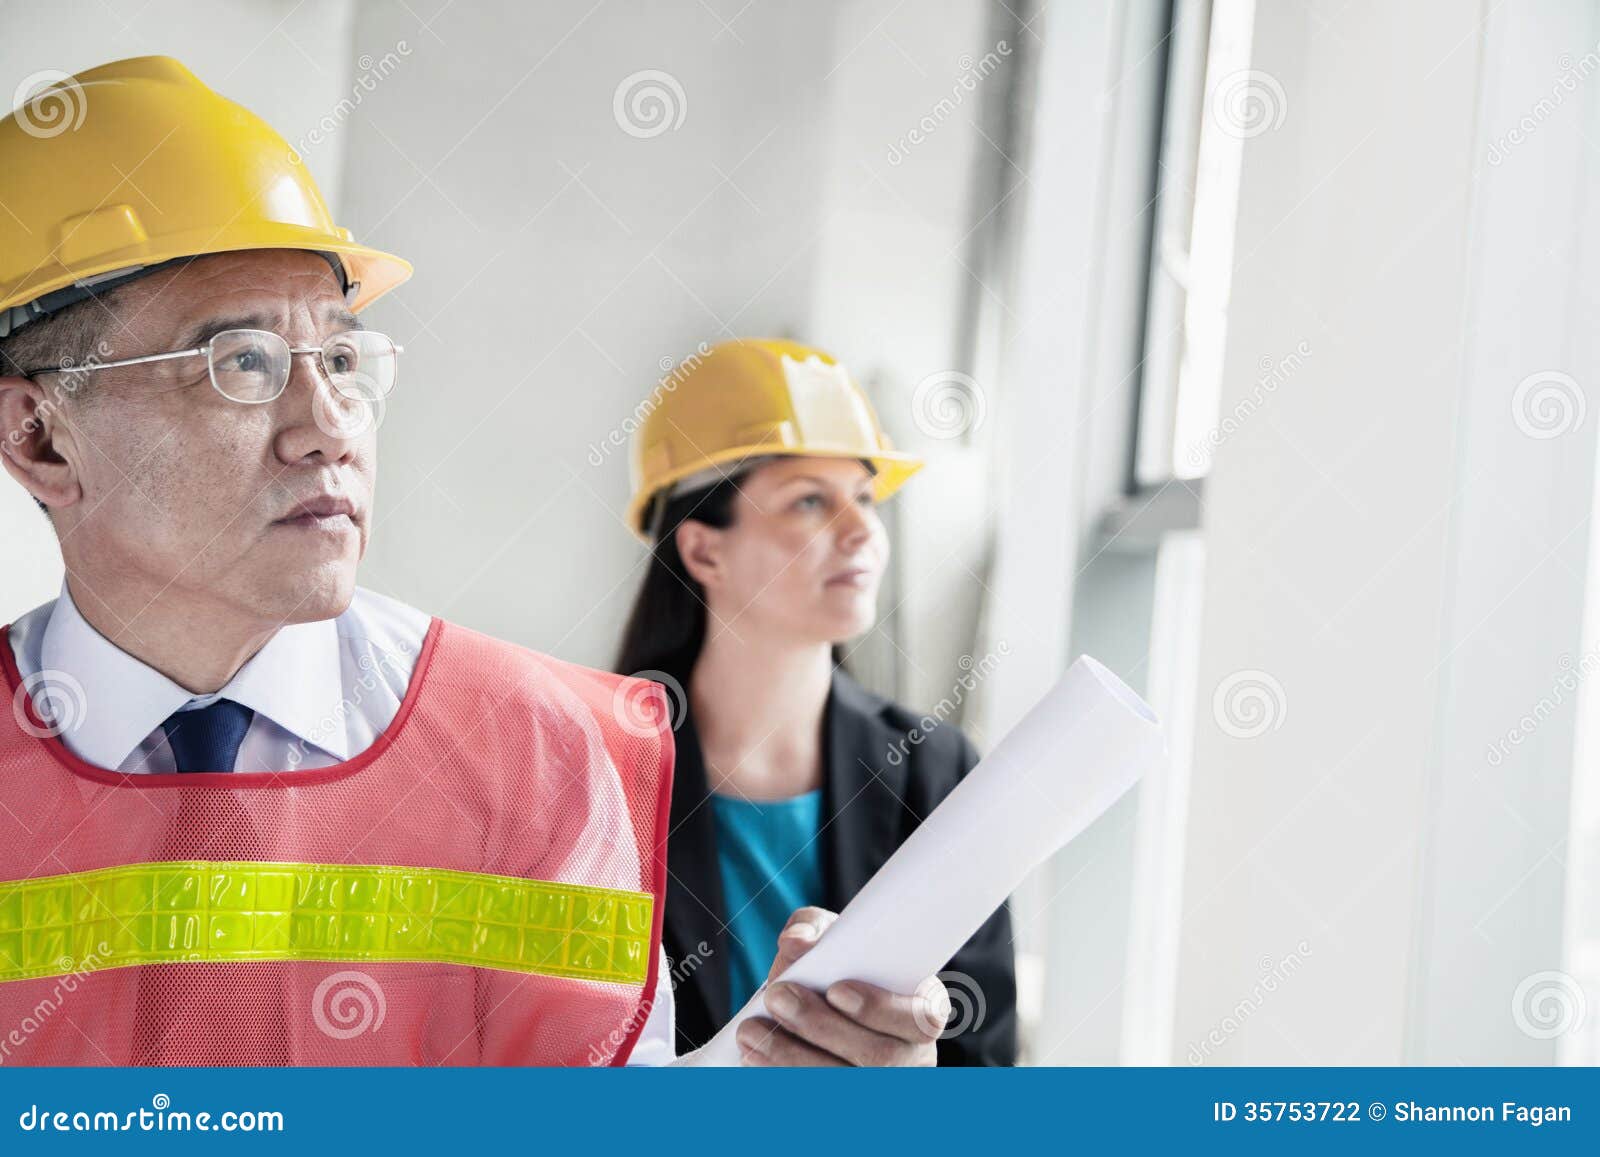 two architects in protective workwear and hardhats working in an office building